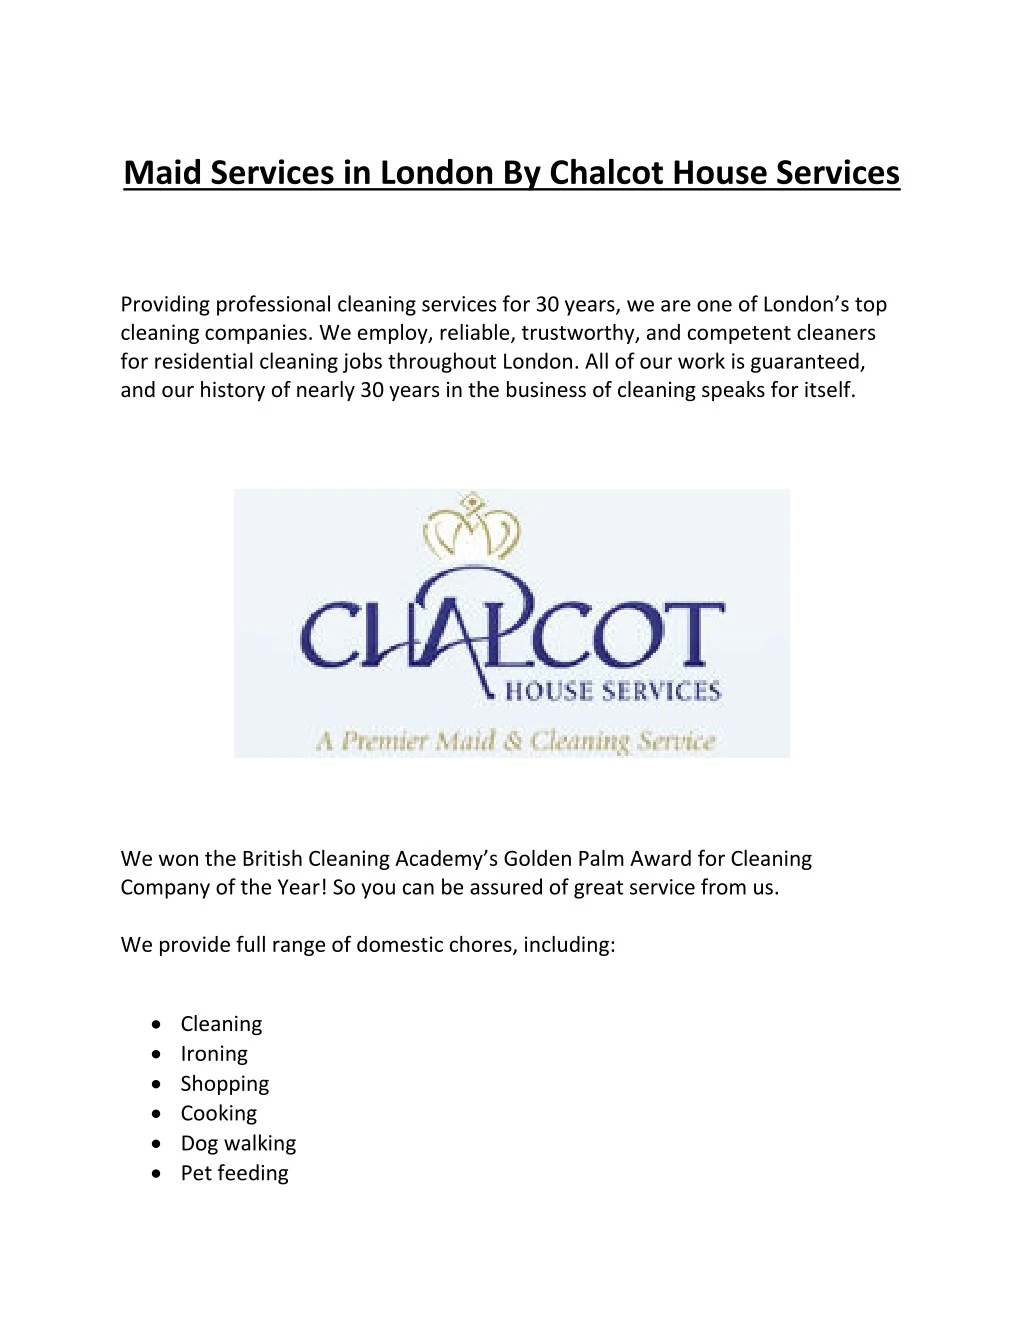 maid services in london by chalcot house services